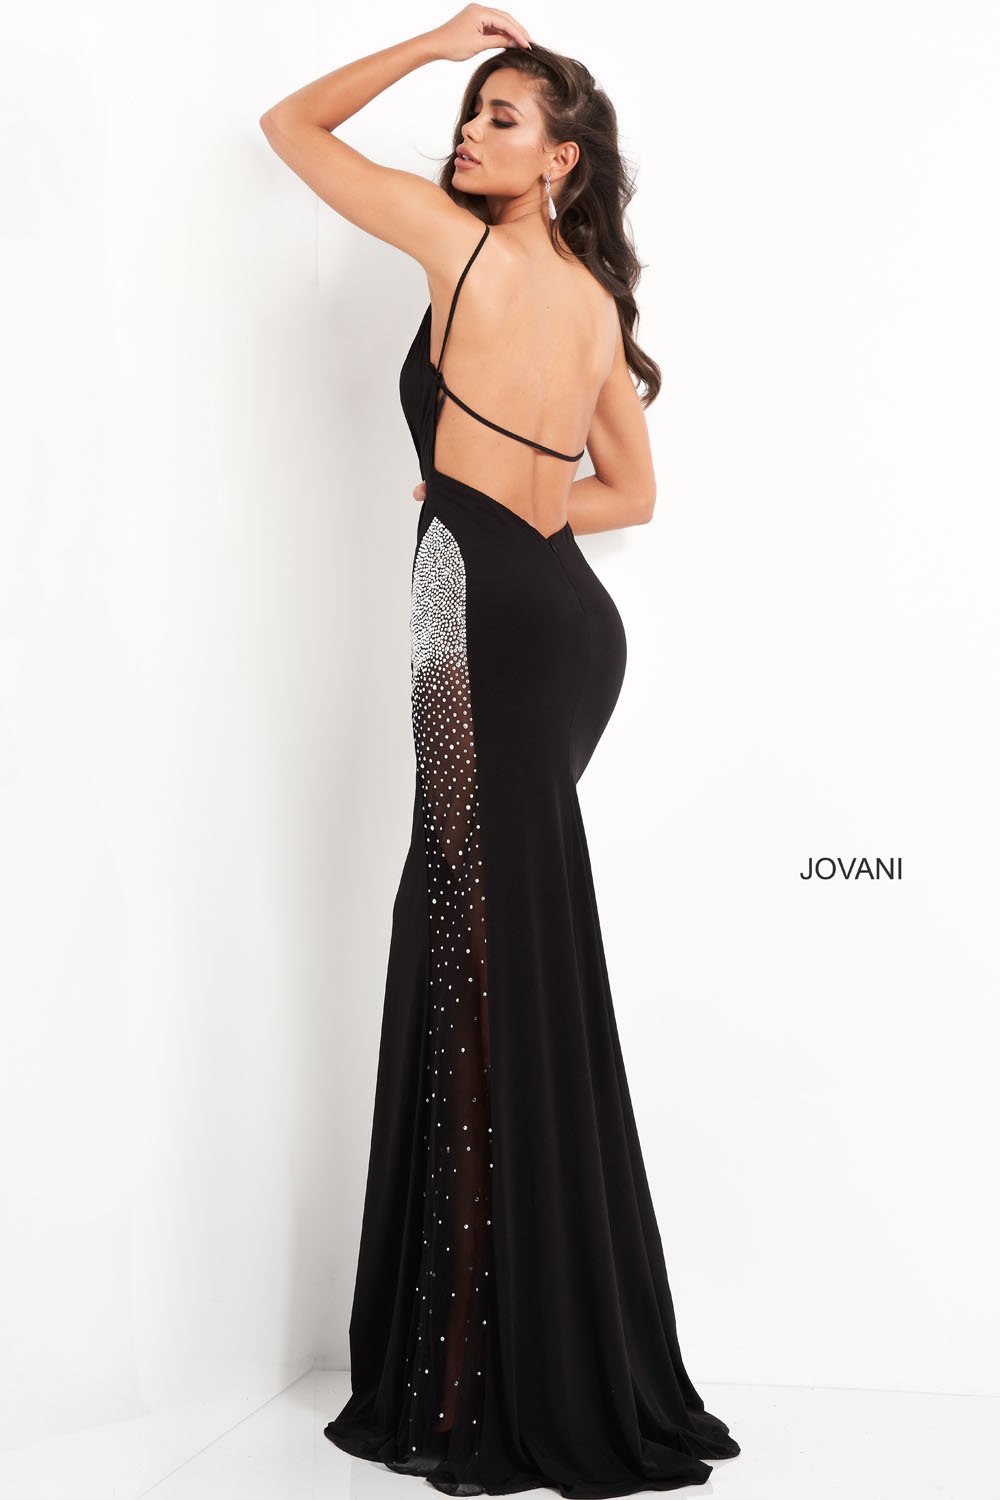 Jovani 06566 dress images in these colors: Black Red, Light Blue.